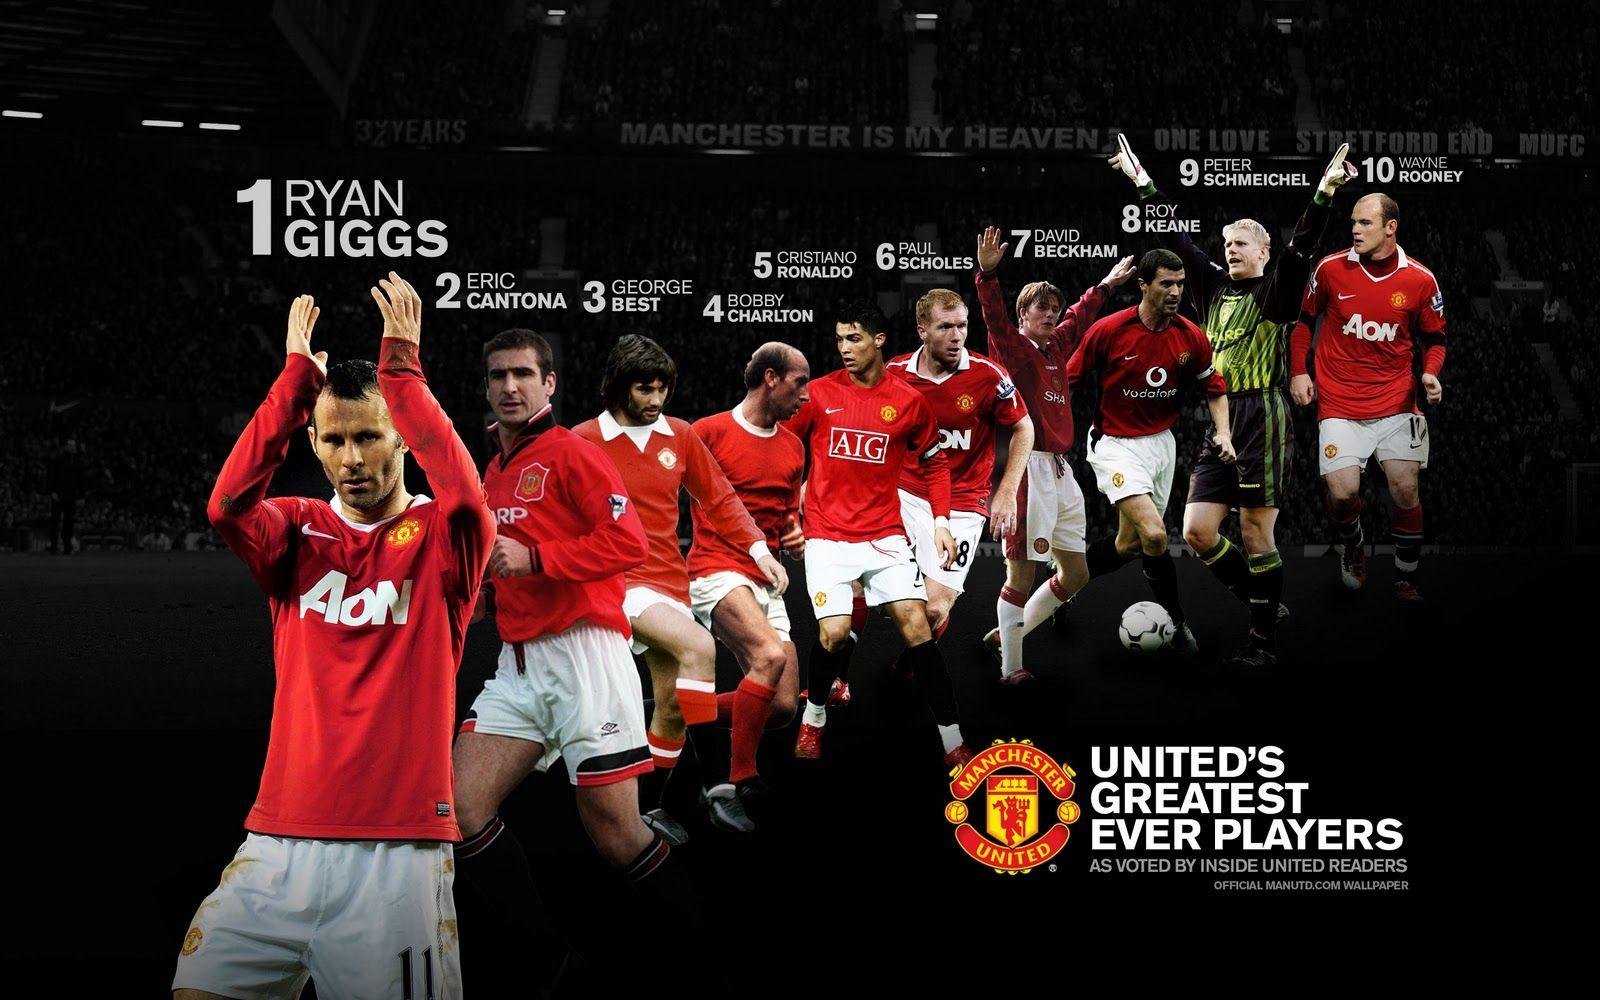 Manchester United Greatest Players Wallpaper. Manchester united